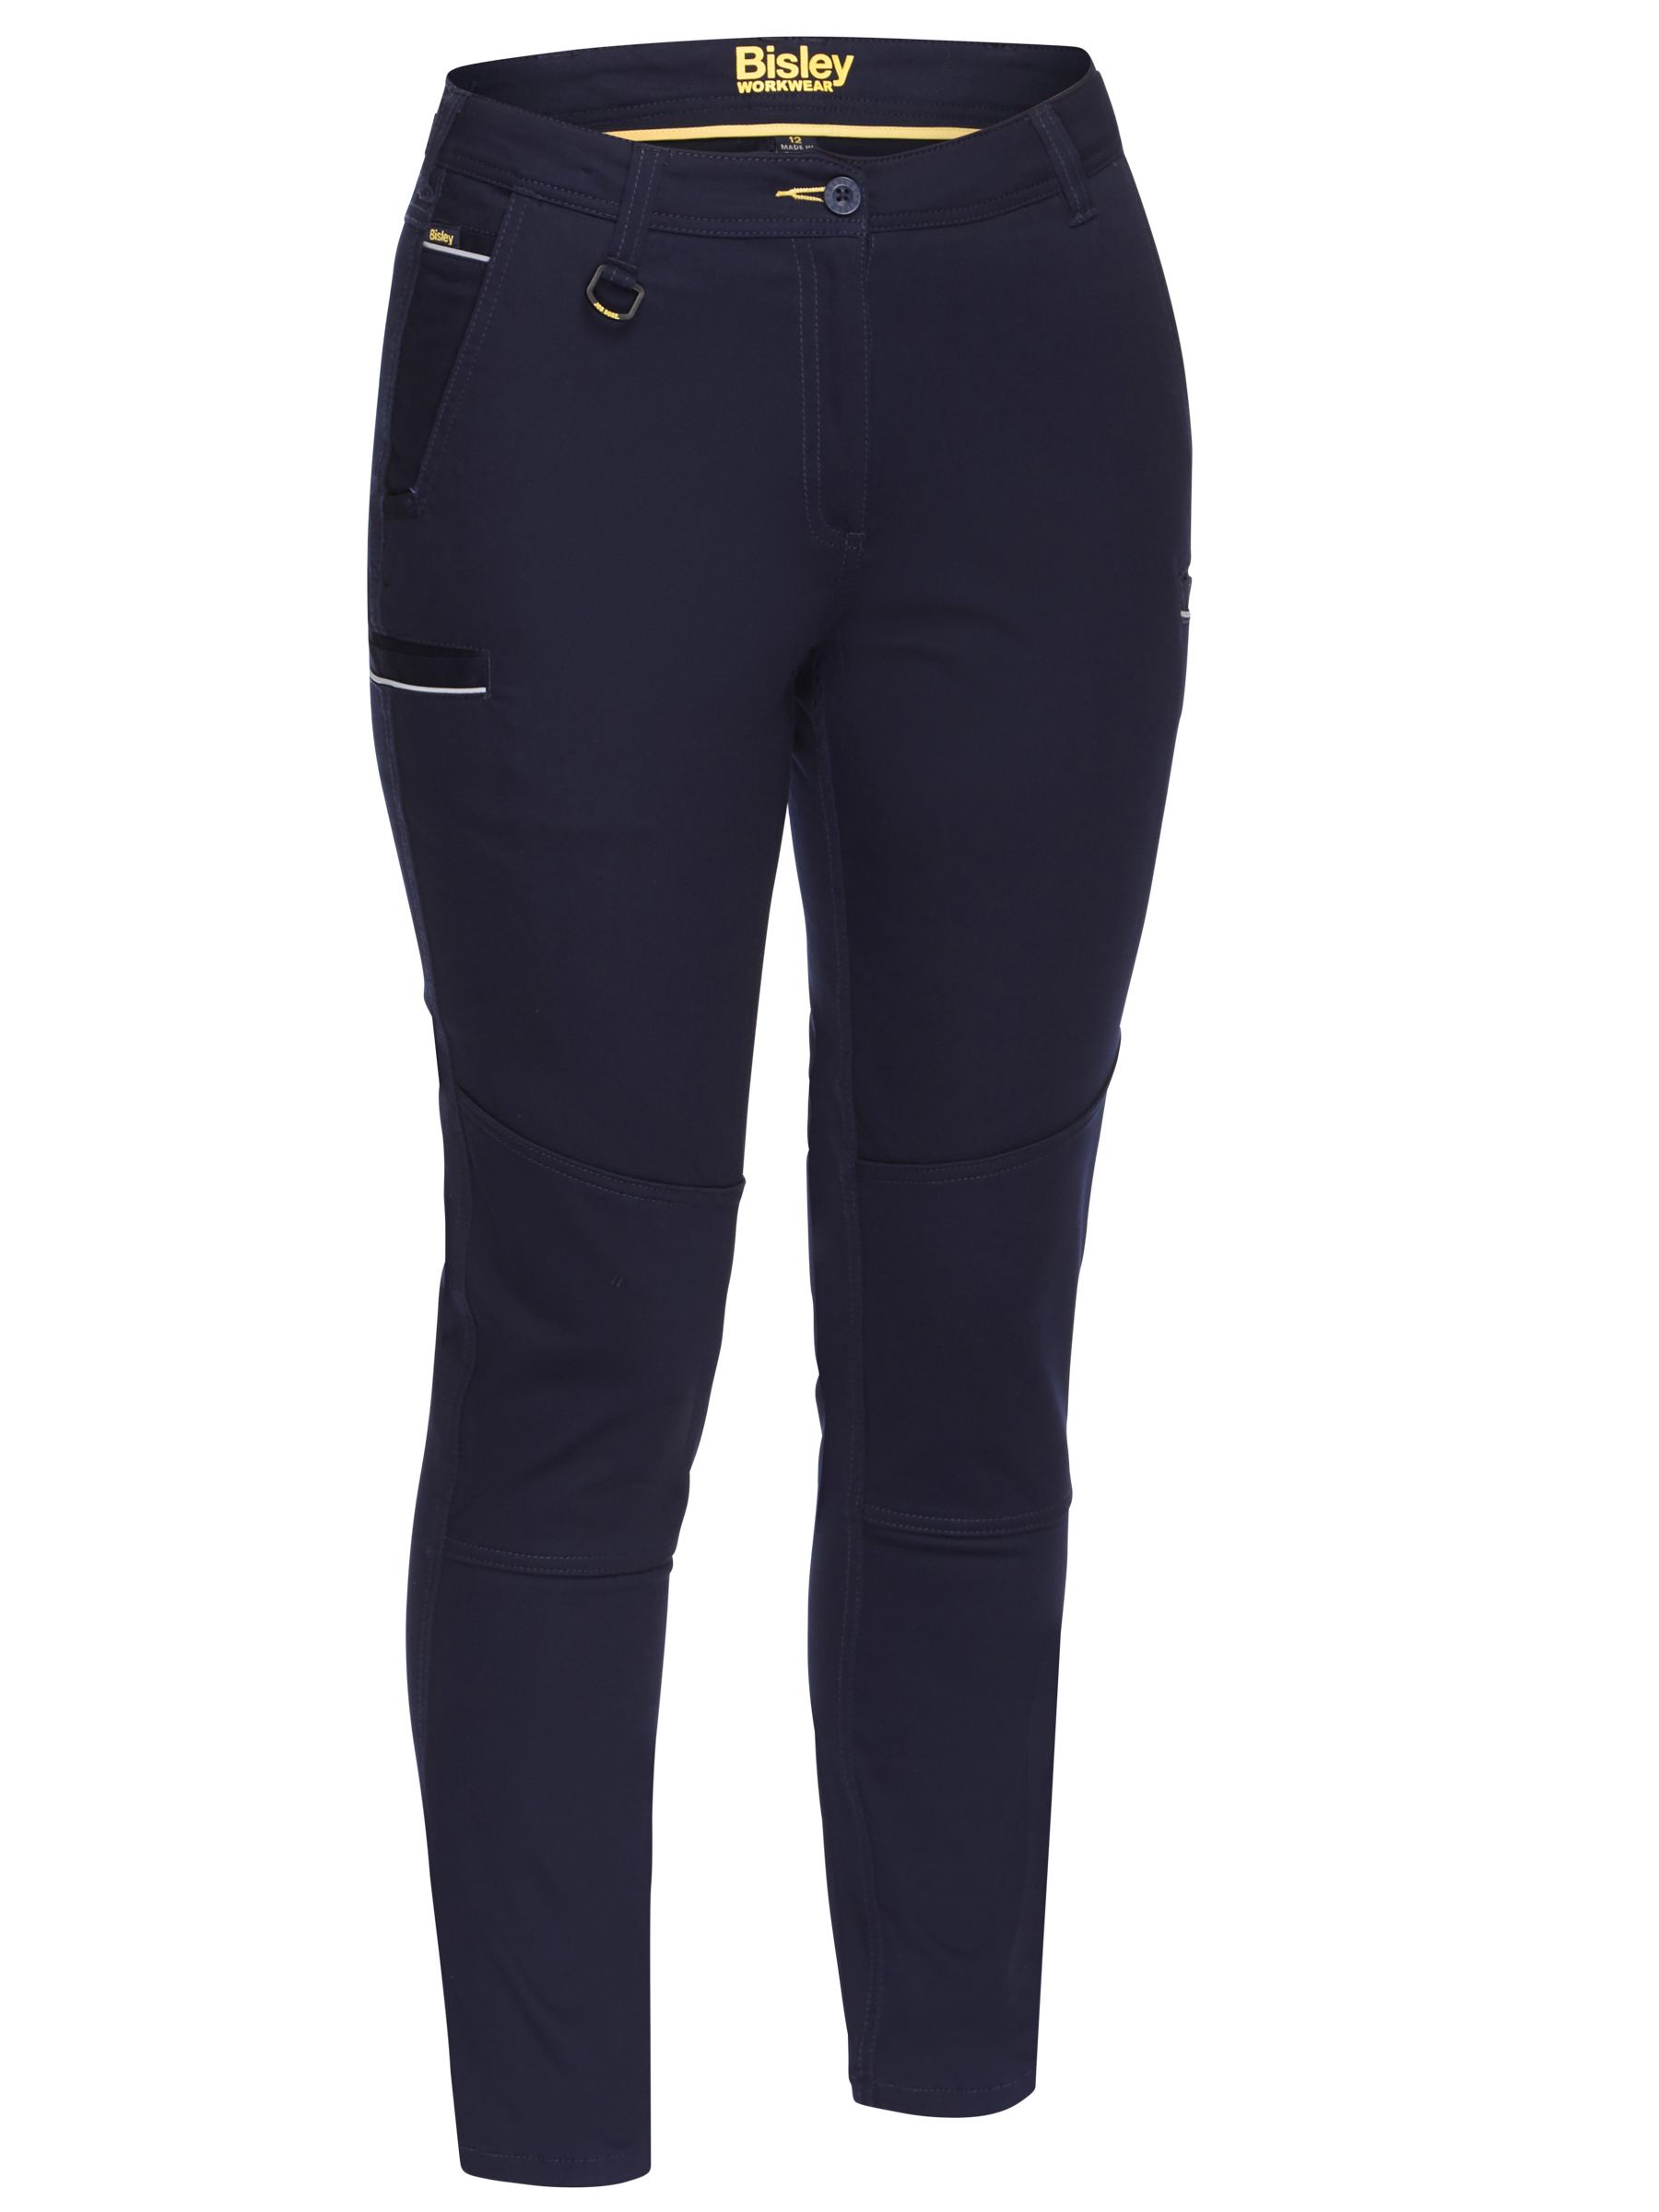 Bisley Women's Taped Mid Rise Stretch Cotton Pants - Navy